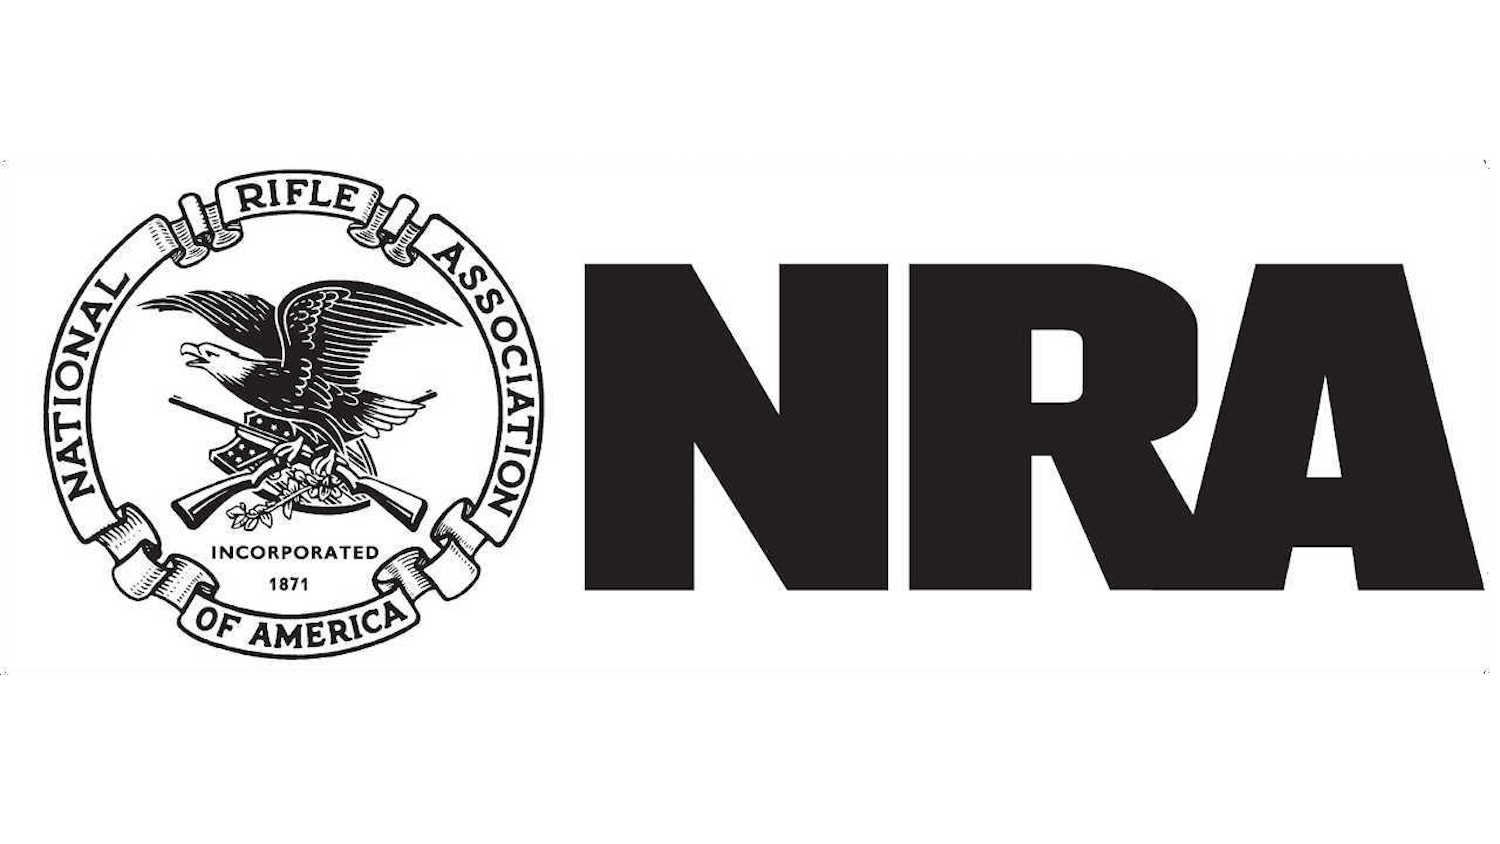 NRA Media Advisory - 2017 Great American Outdoor Show